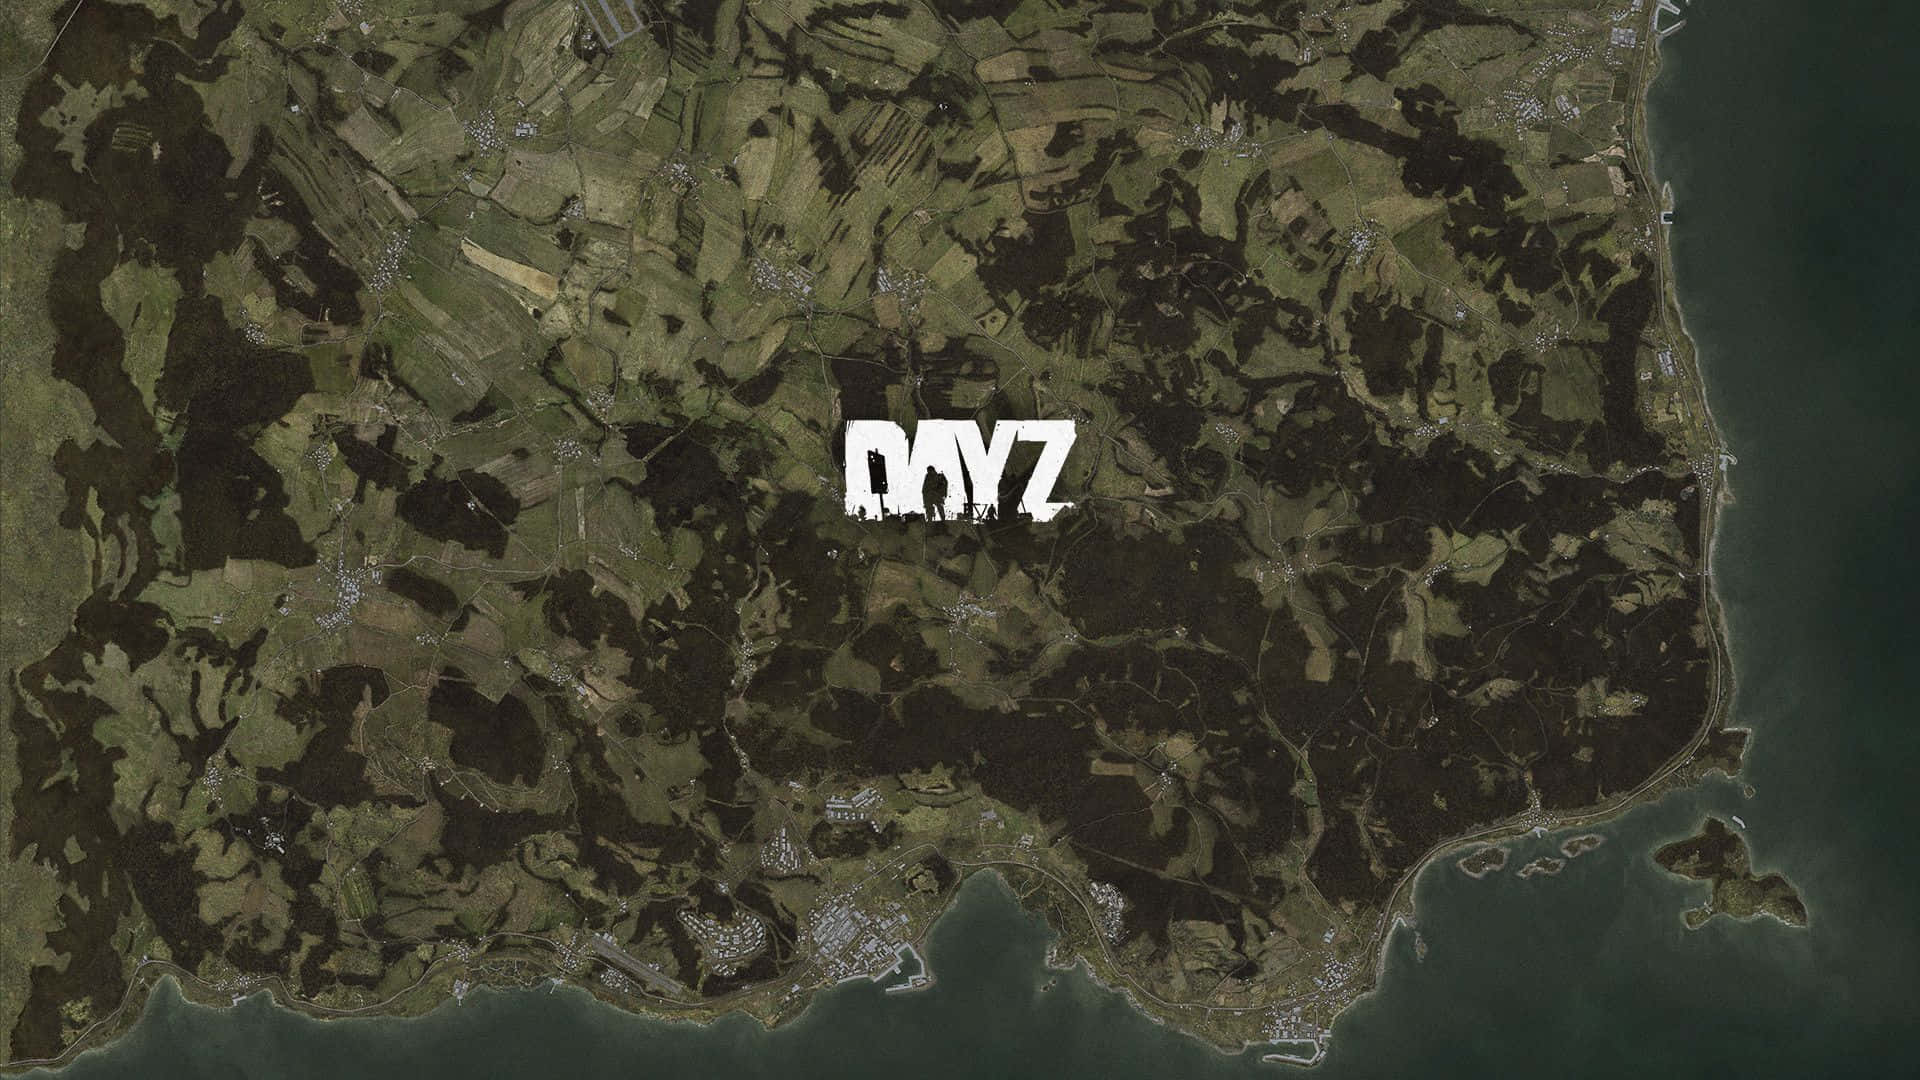 Download A Map With The Word N7 On It